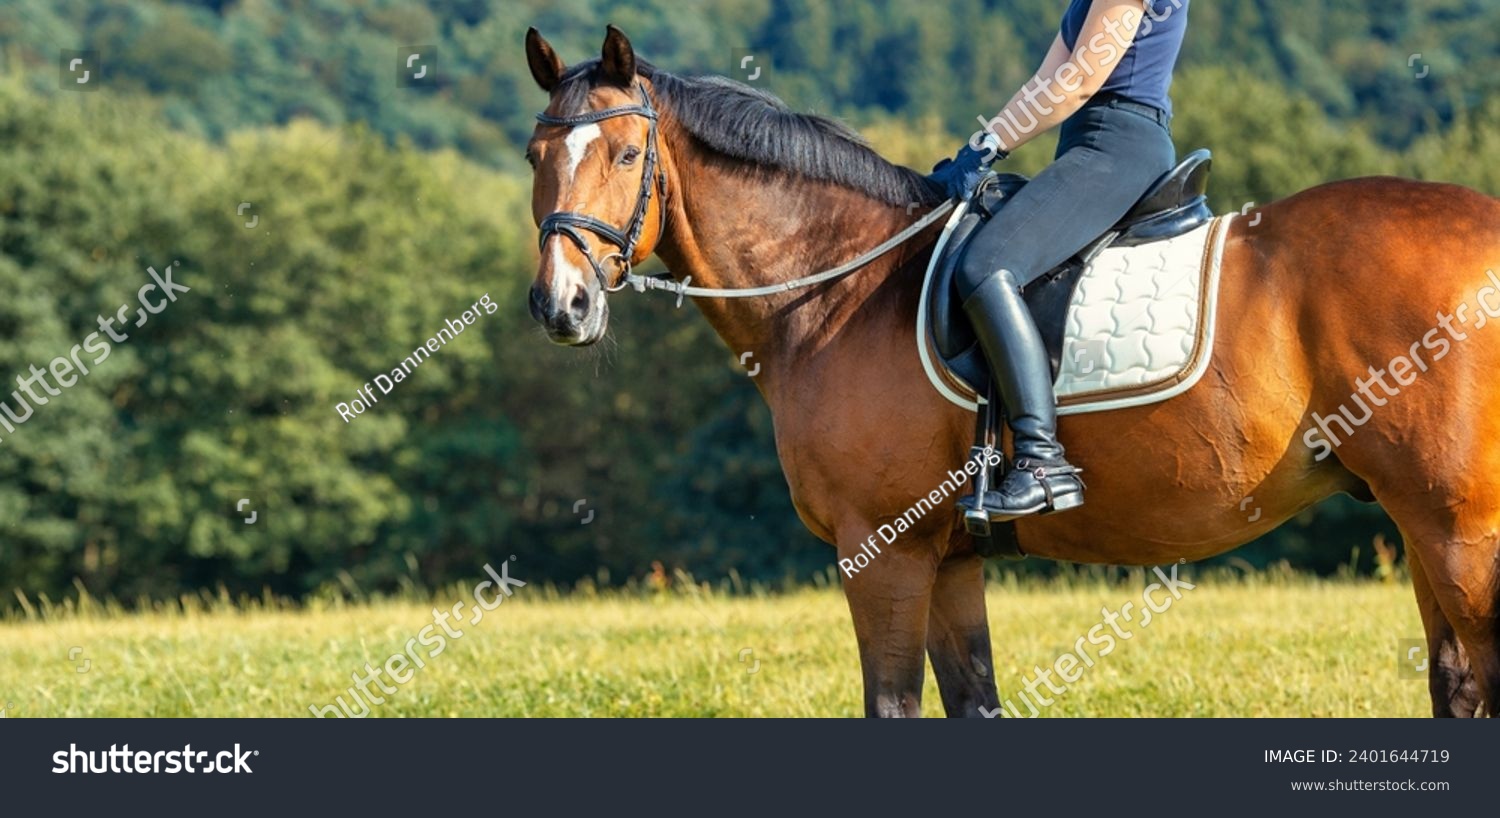 Horse with rider on a meadow, landscape format horse with saddle with rider in Horse with rider on a meadow, landscape format horse with saddle with rider in section. #2401644719